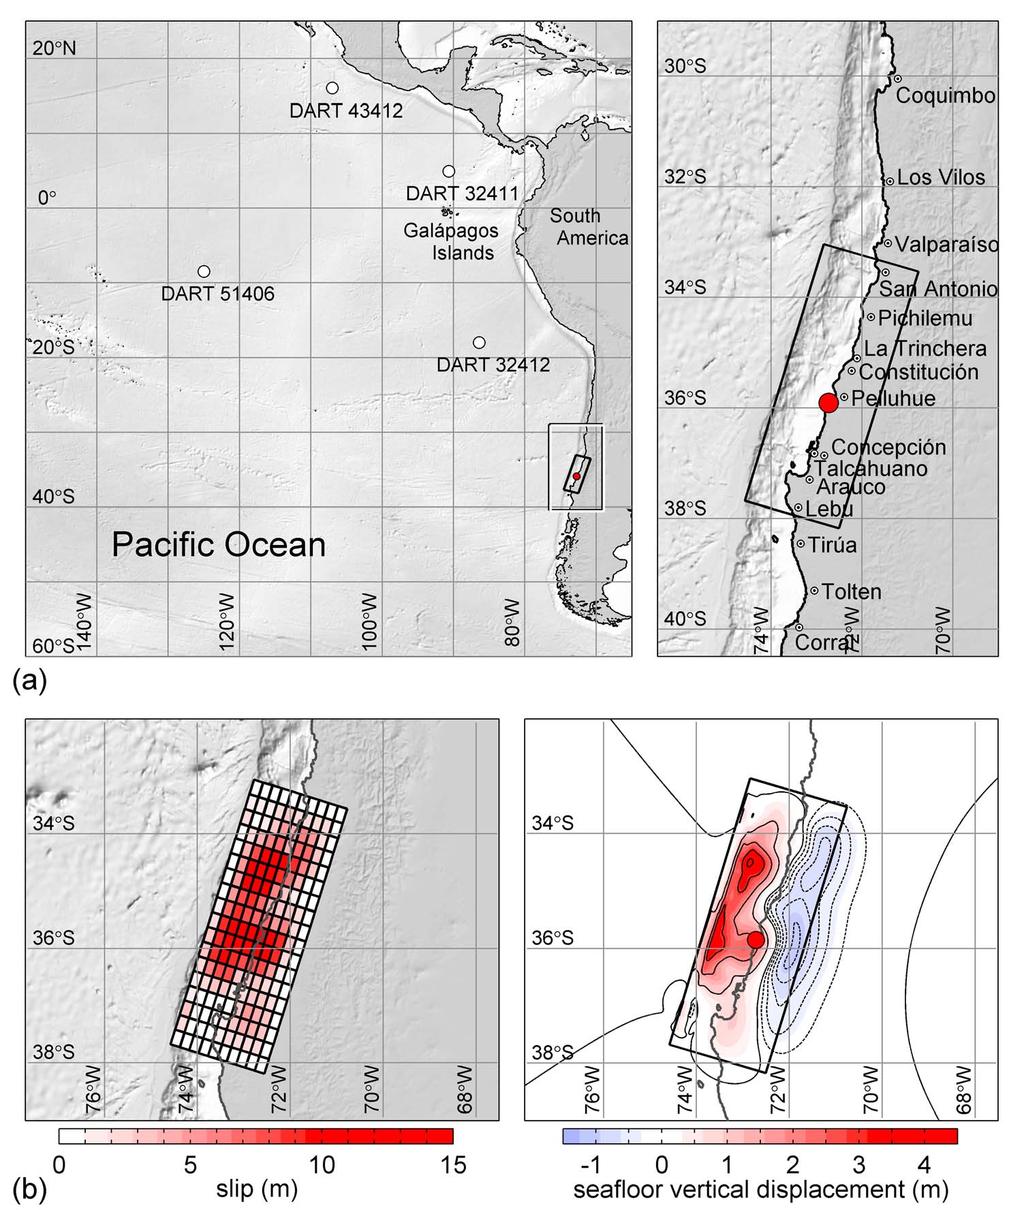 Figure 1. Model setting and data. (a) Nested computational grids, location of DART buoys, and rupture area. (b) Slip distribution and vertical seafloor displacement.